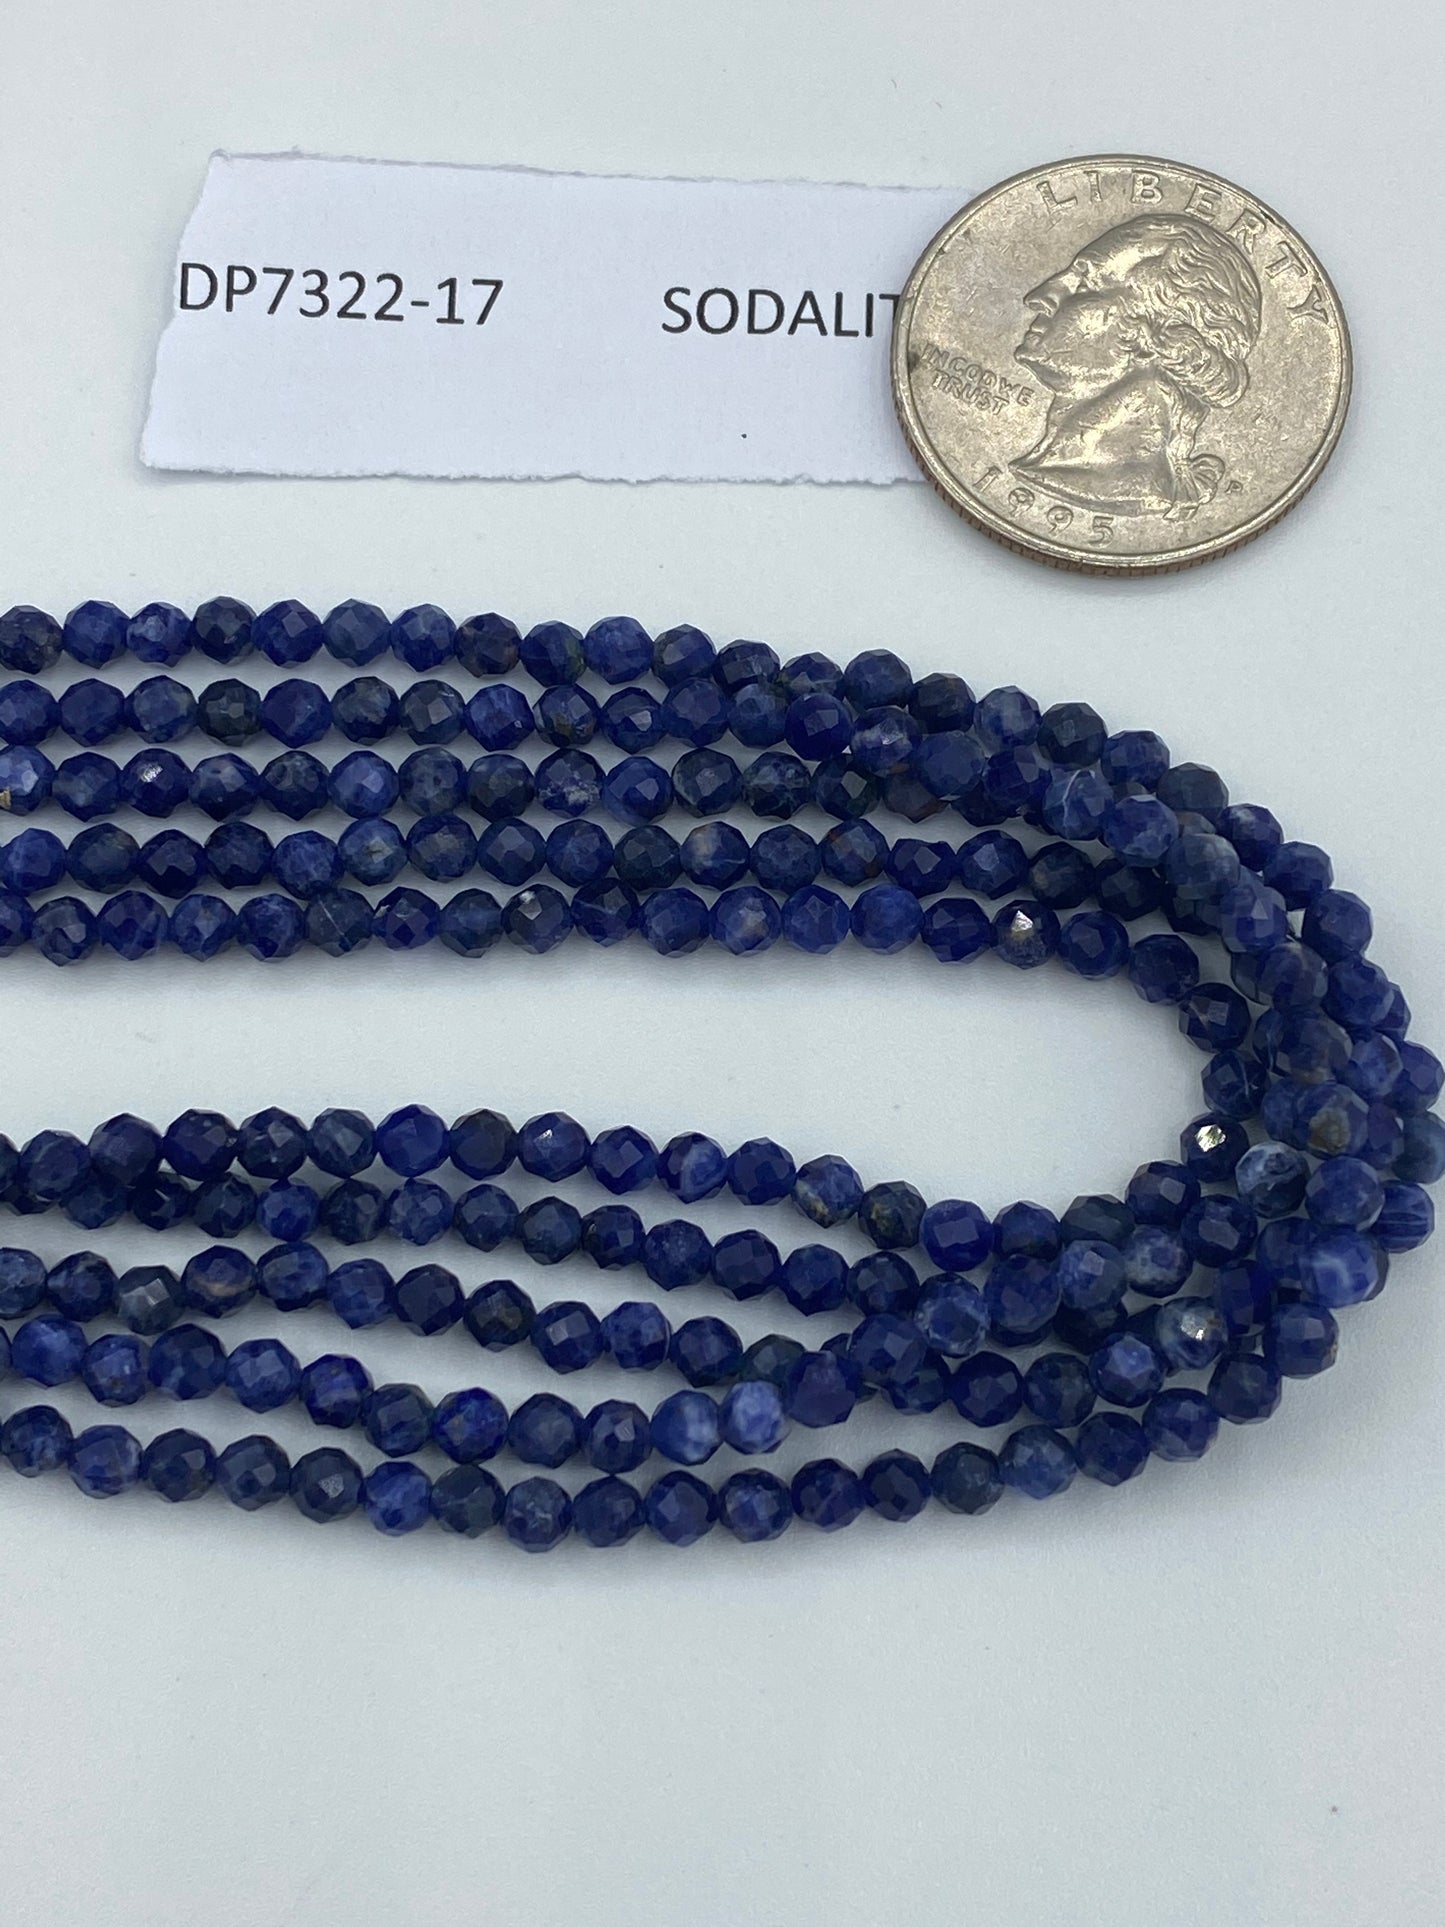 SODALITE BEADS ROUND FACETED 3-4MM